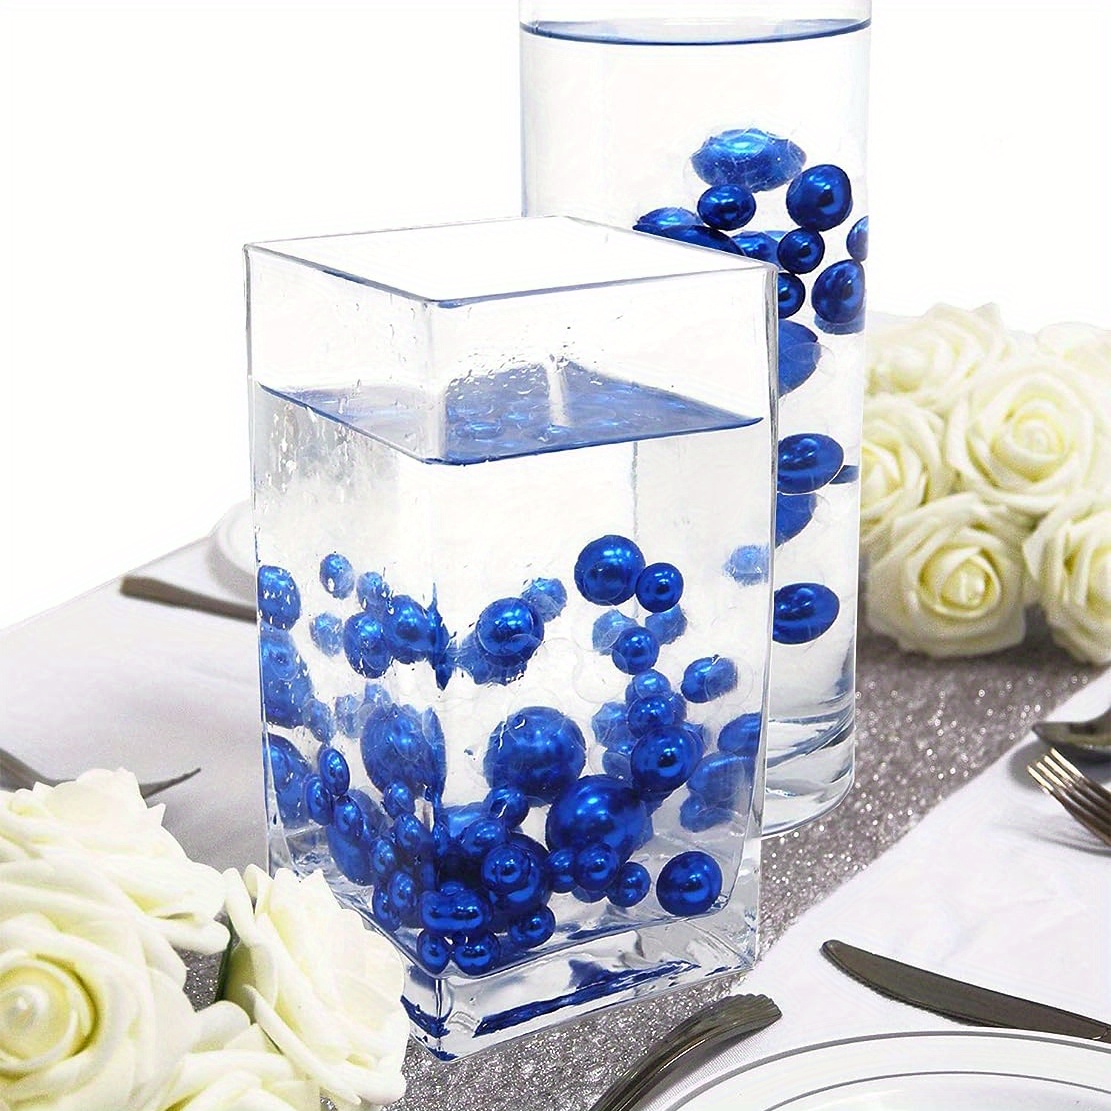 Floating White Pearls - No Hole Jumbo/Assorted Sizes Vase Decorations + Includes Transparent Water Gels for Floating The Pearls